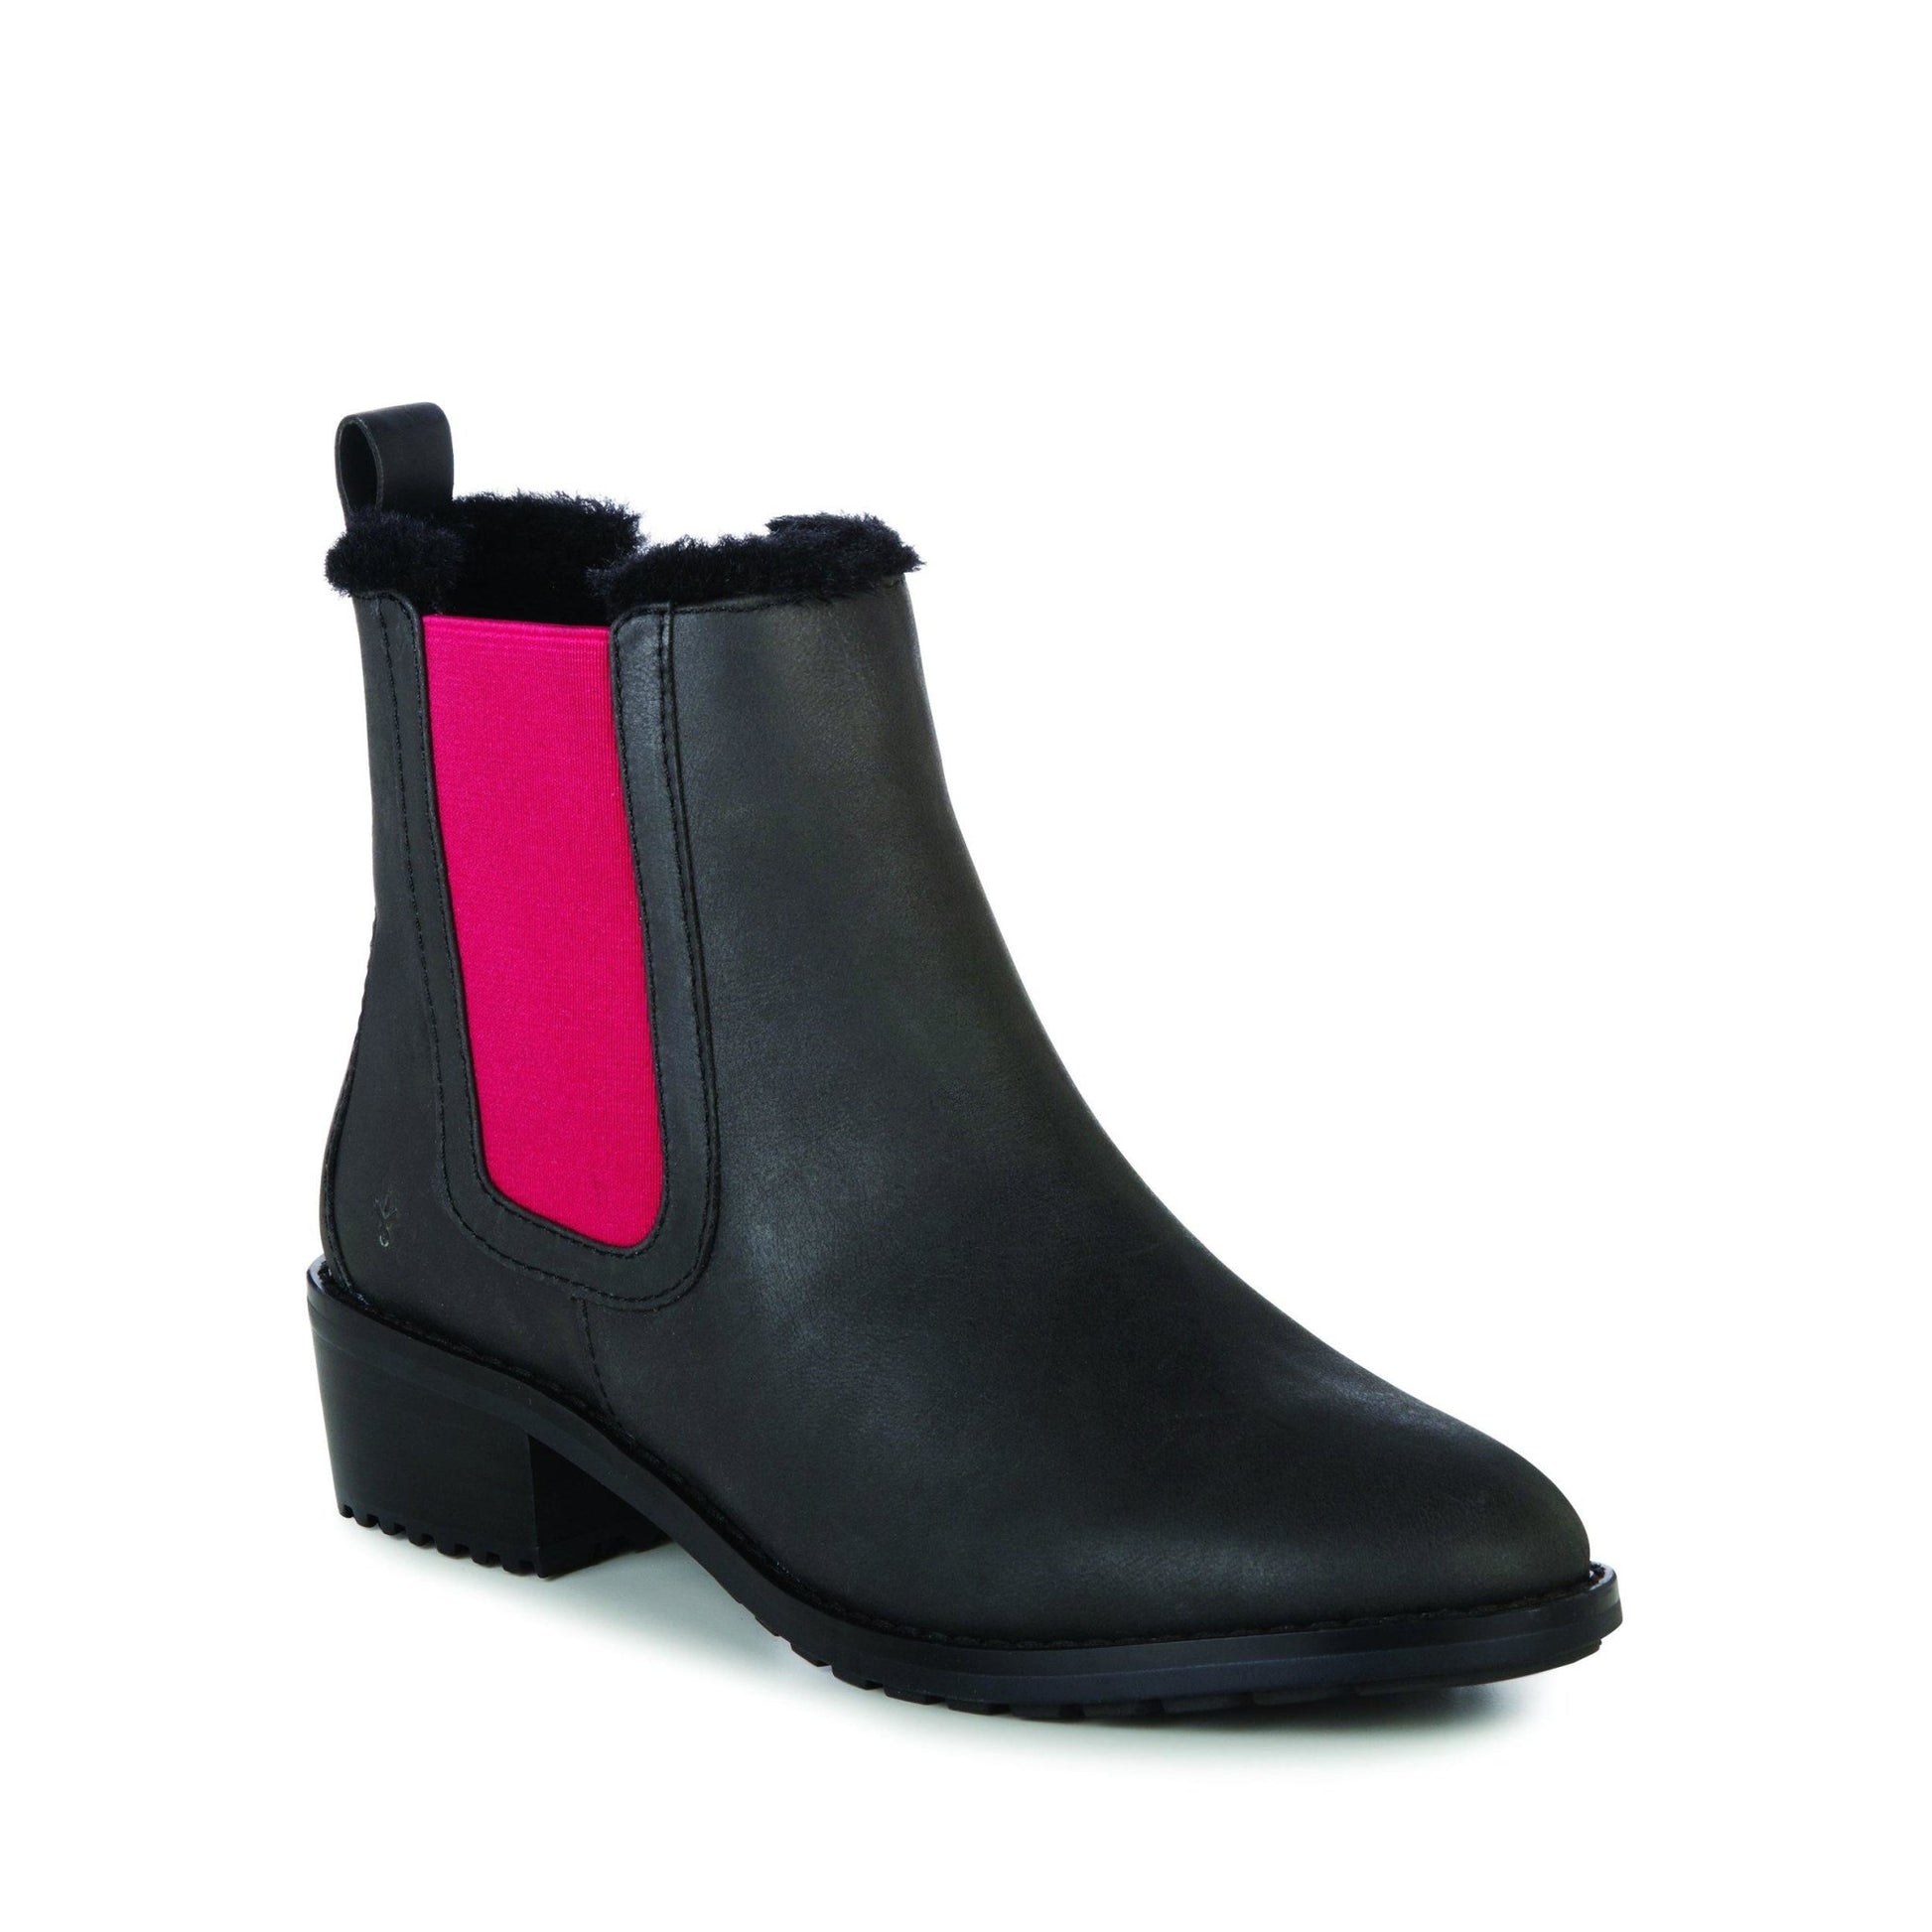 Emu Australia Ellin Pop - Chelsea style Waterproof Ankle Boot with pop of colour on elastic sides | The Bower Tasmania